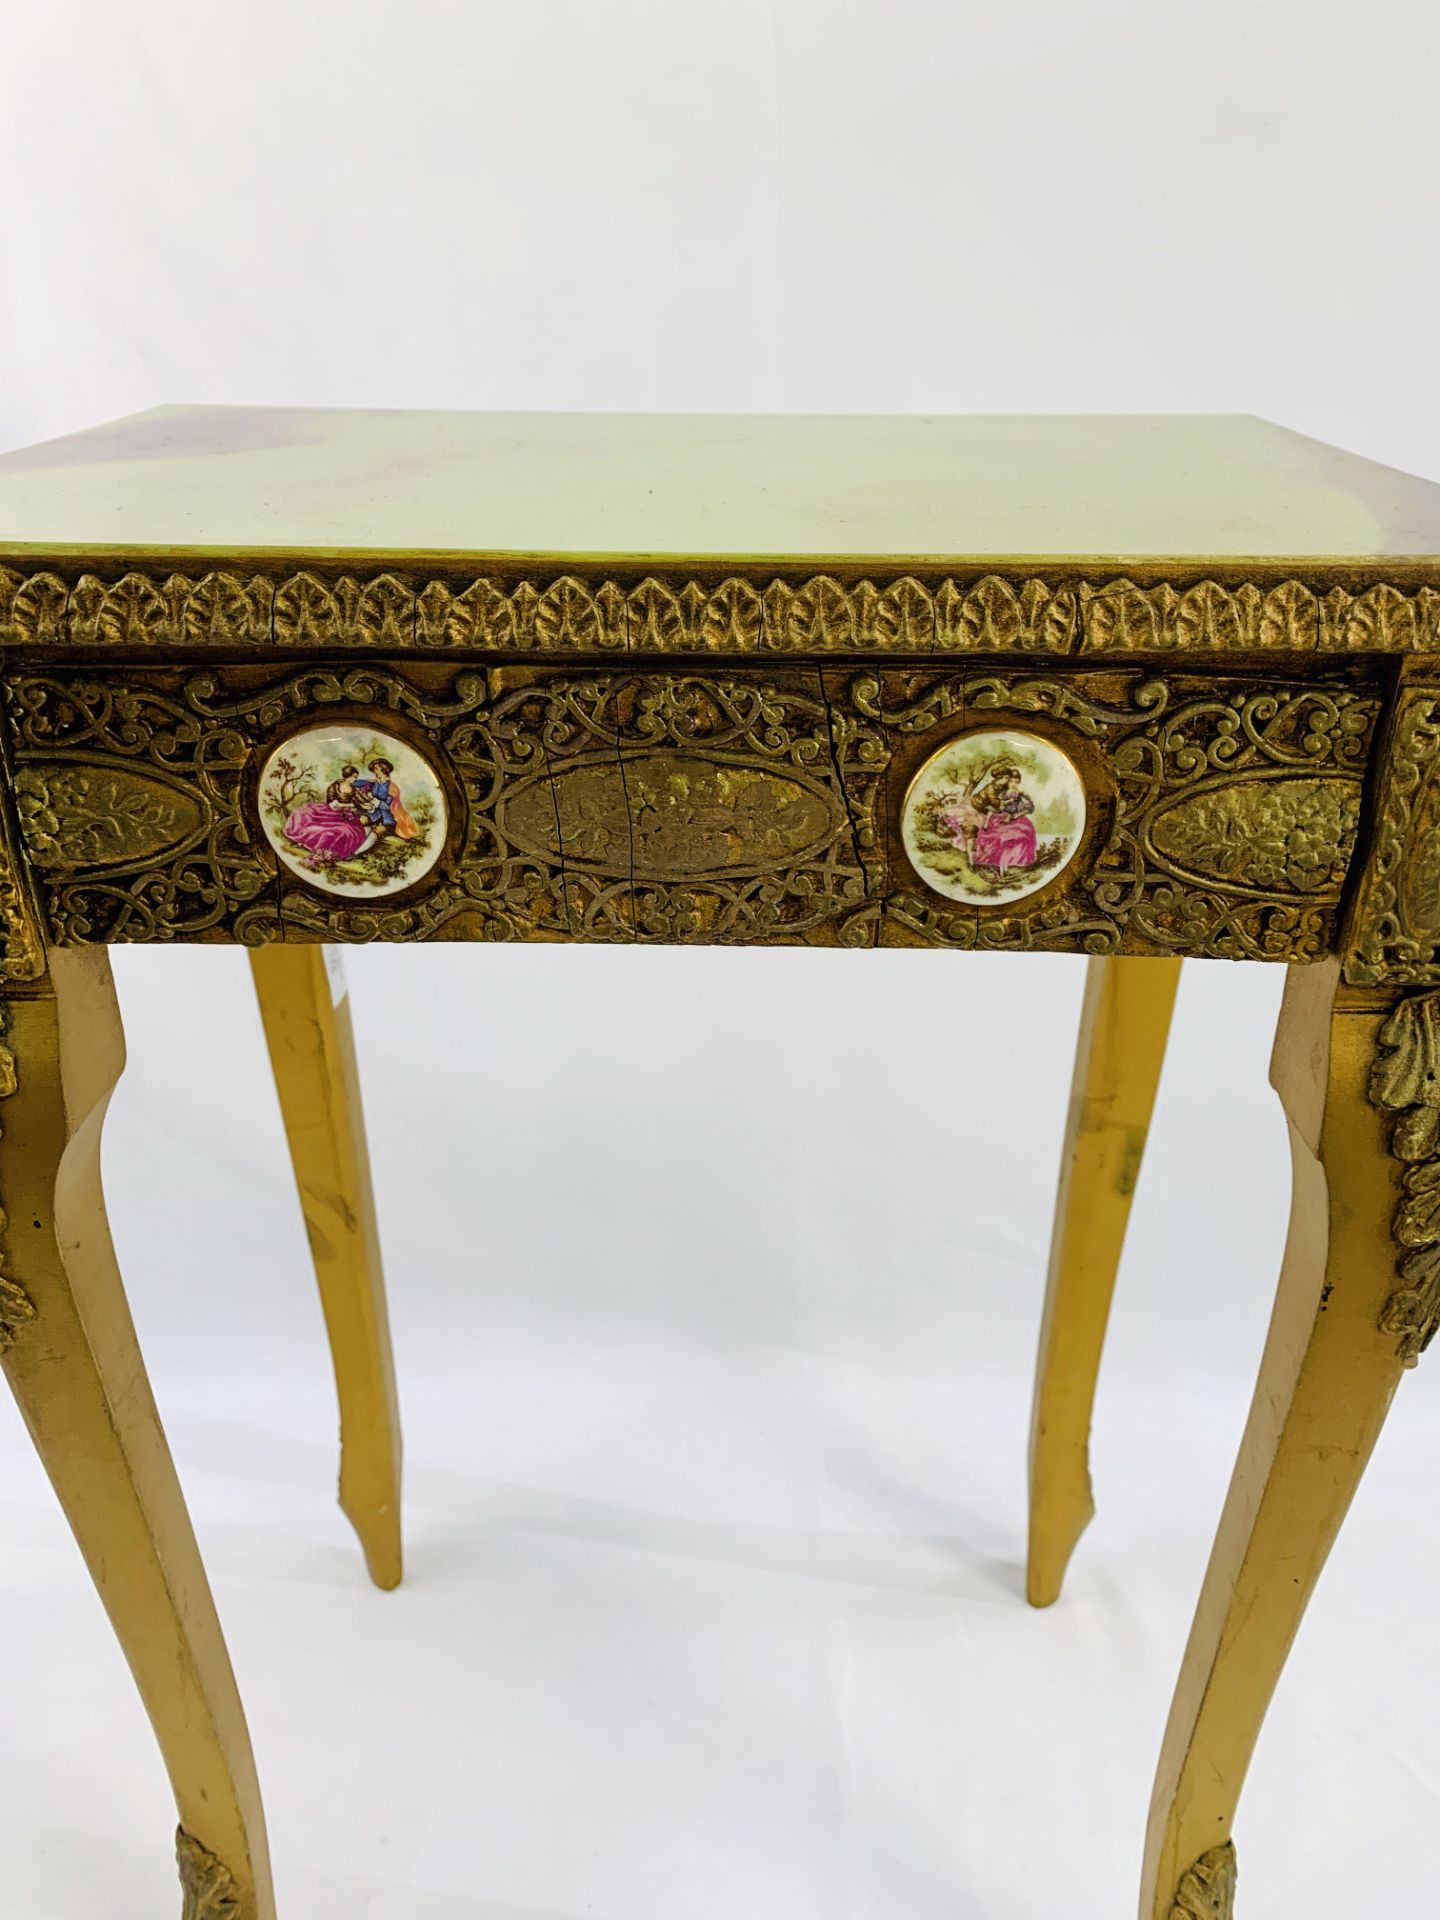 Reproduction French Baroque gilt wood & faux marble wine table, with several Limoges style plaques. - Image 5 of 5